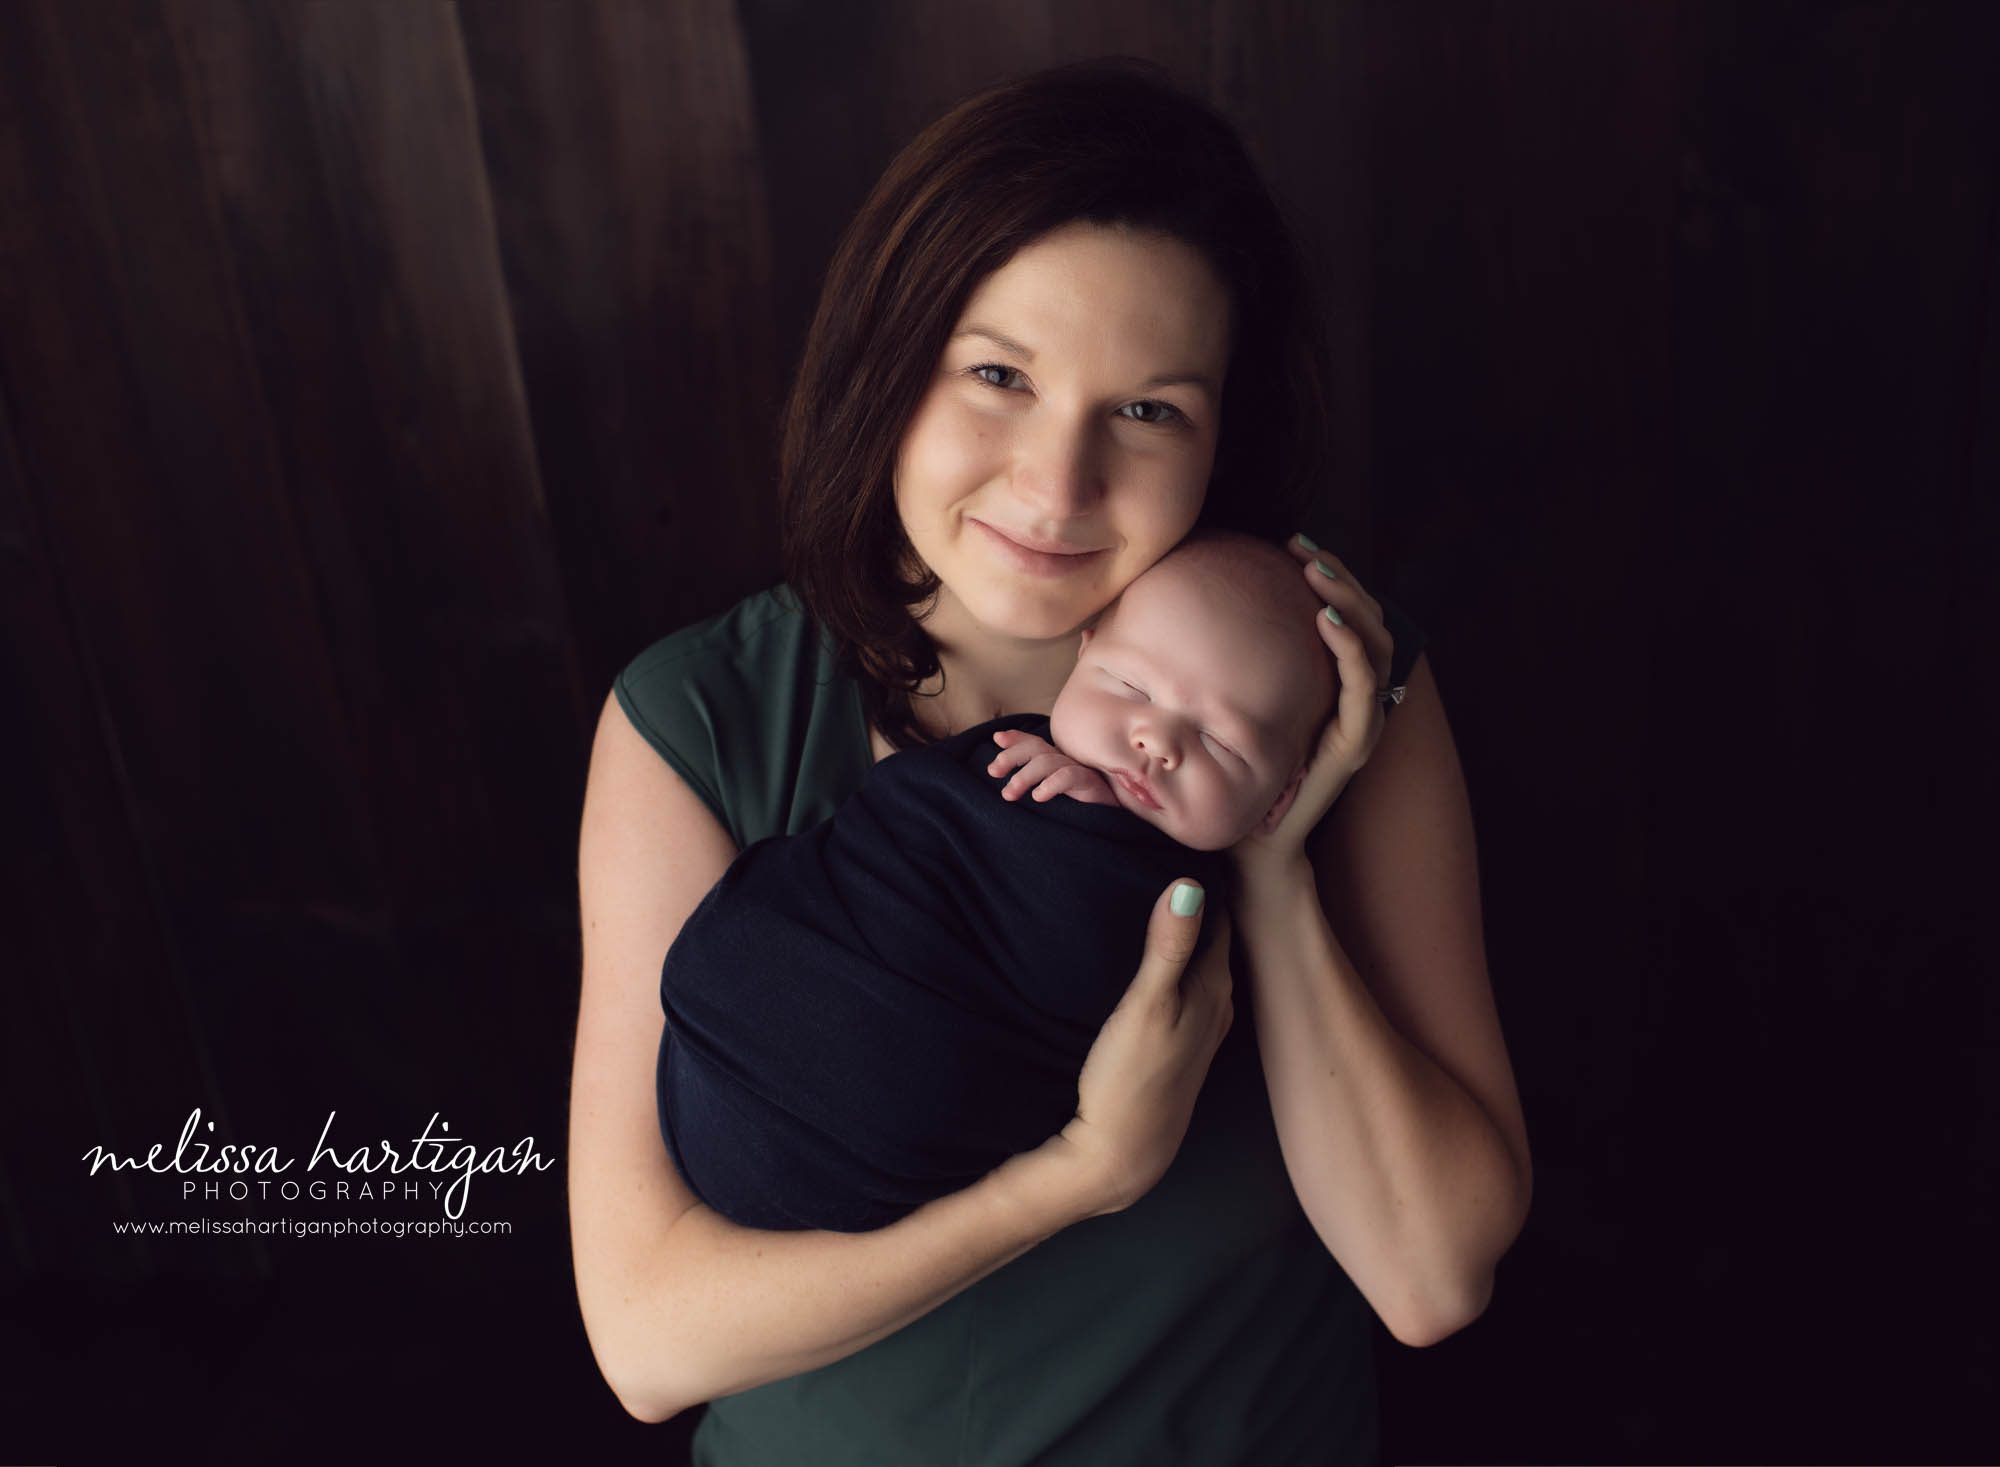 Mom posed with baby boy wrapped studio photos